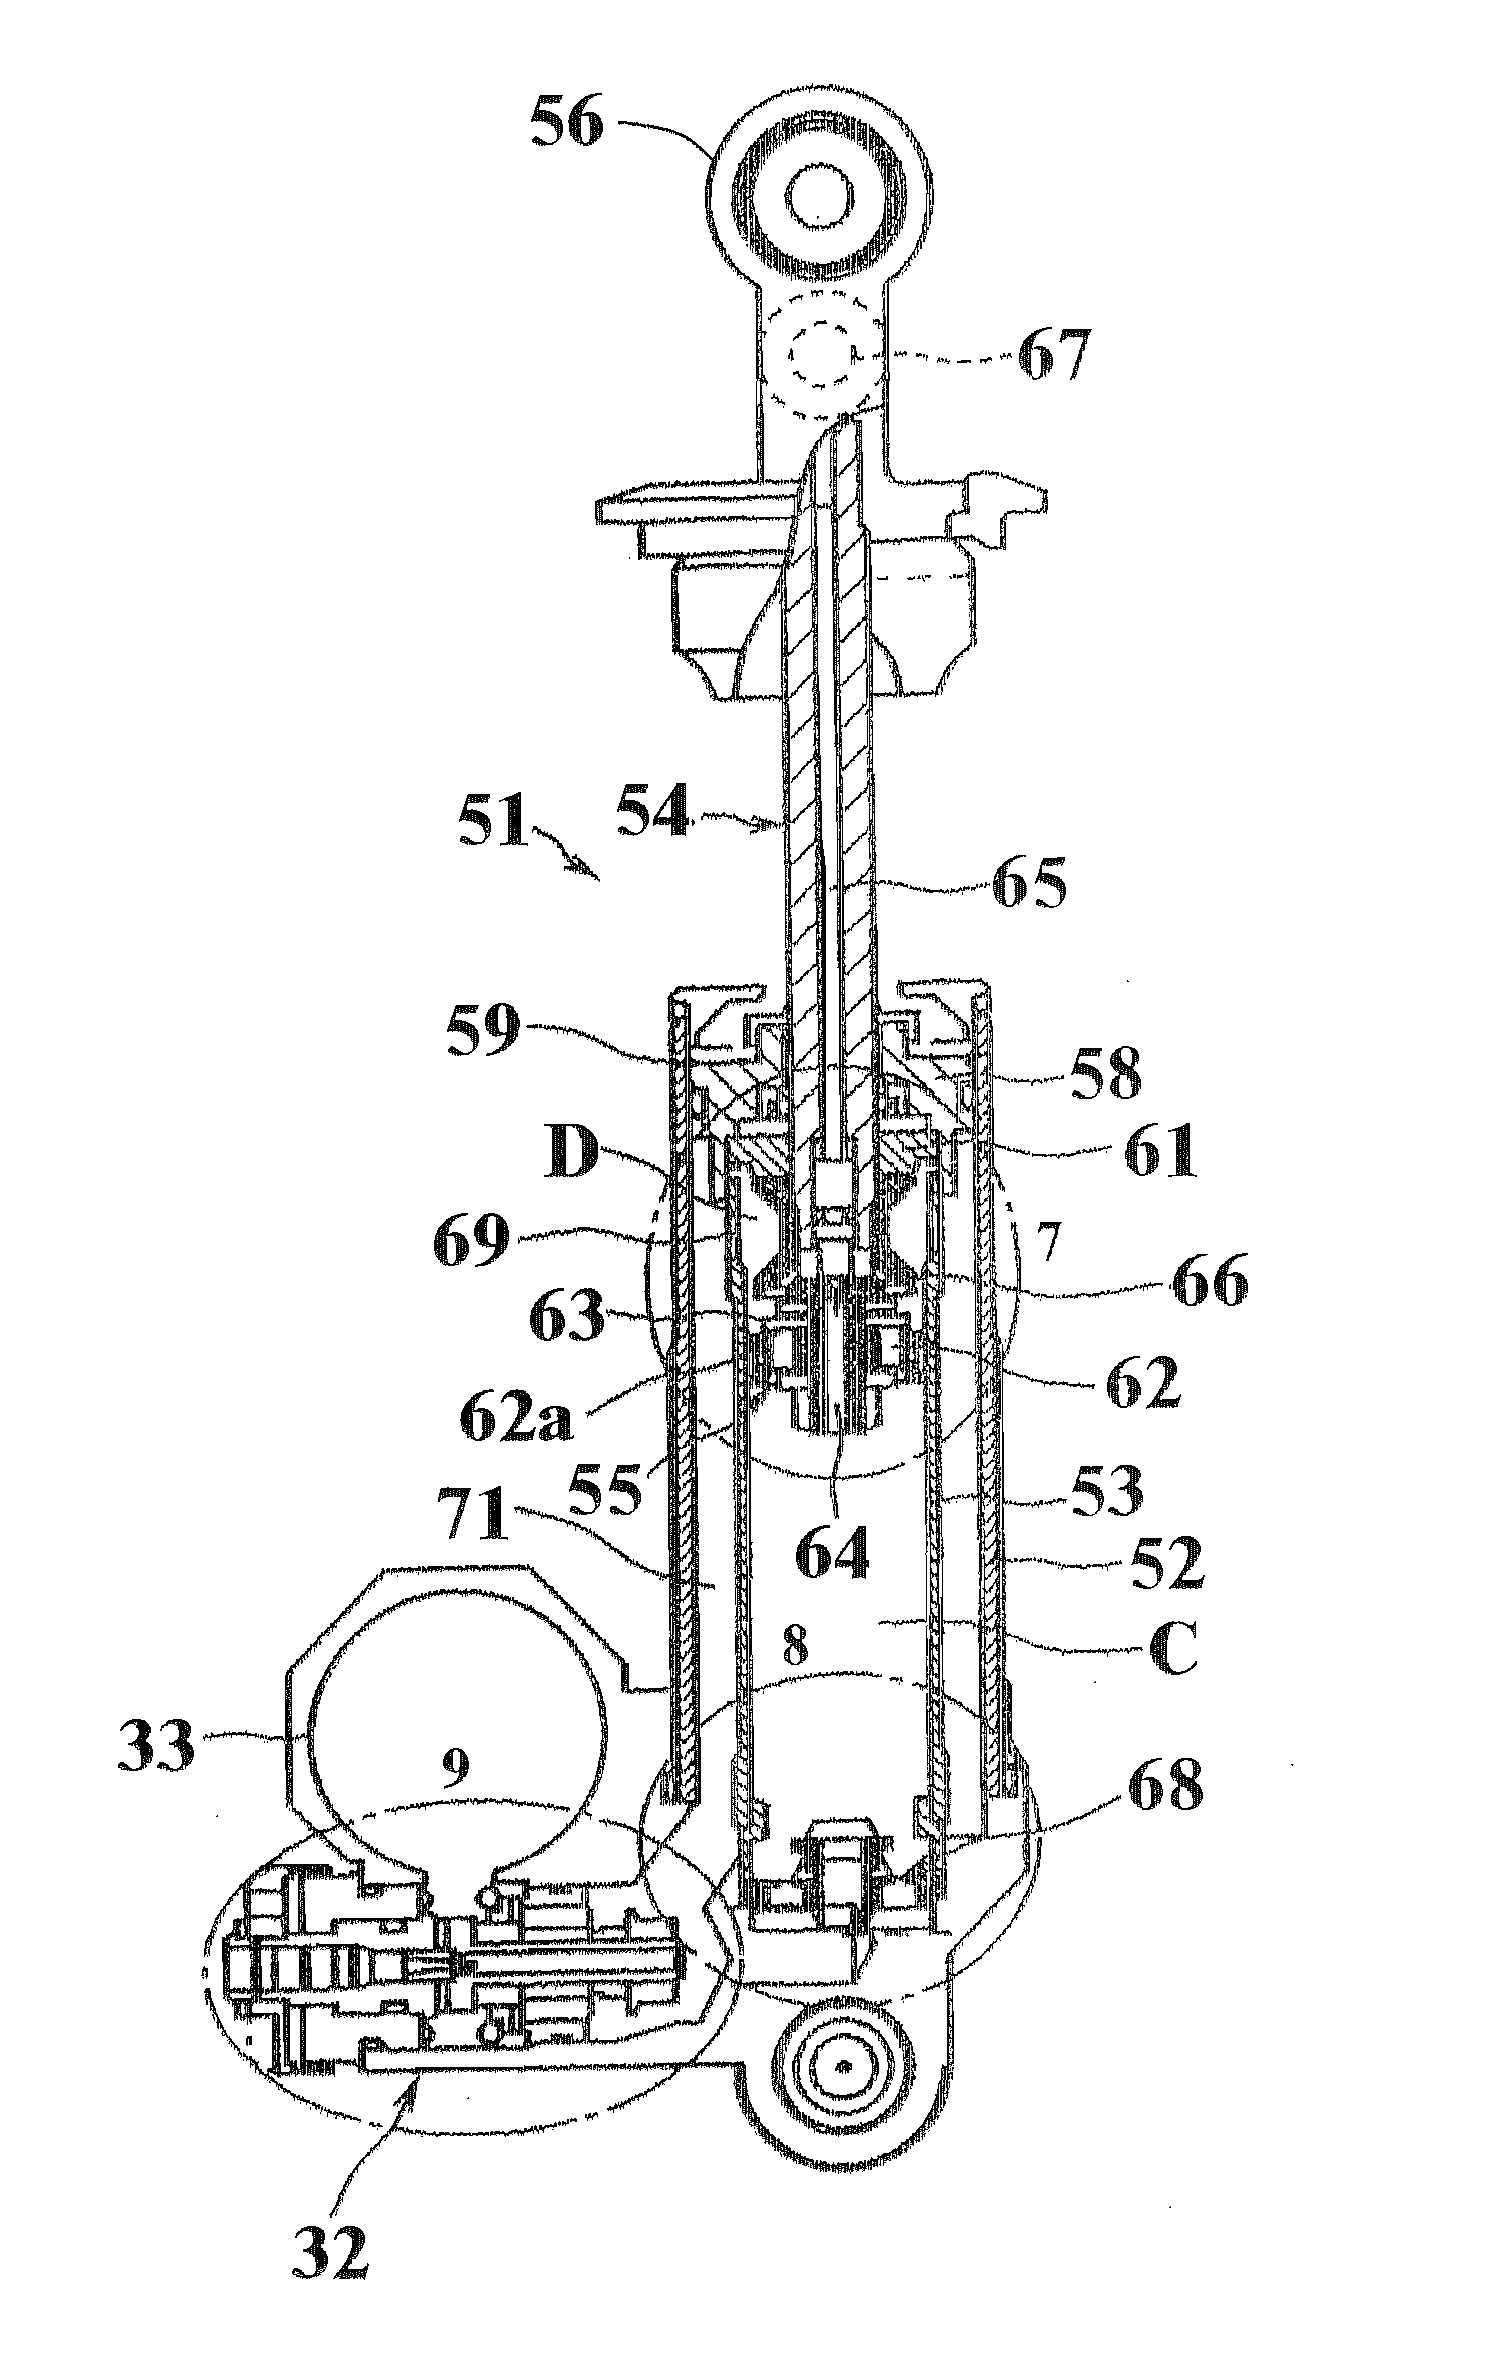 Hydraulic damper for vehicle